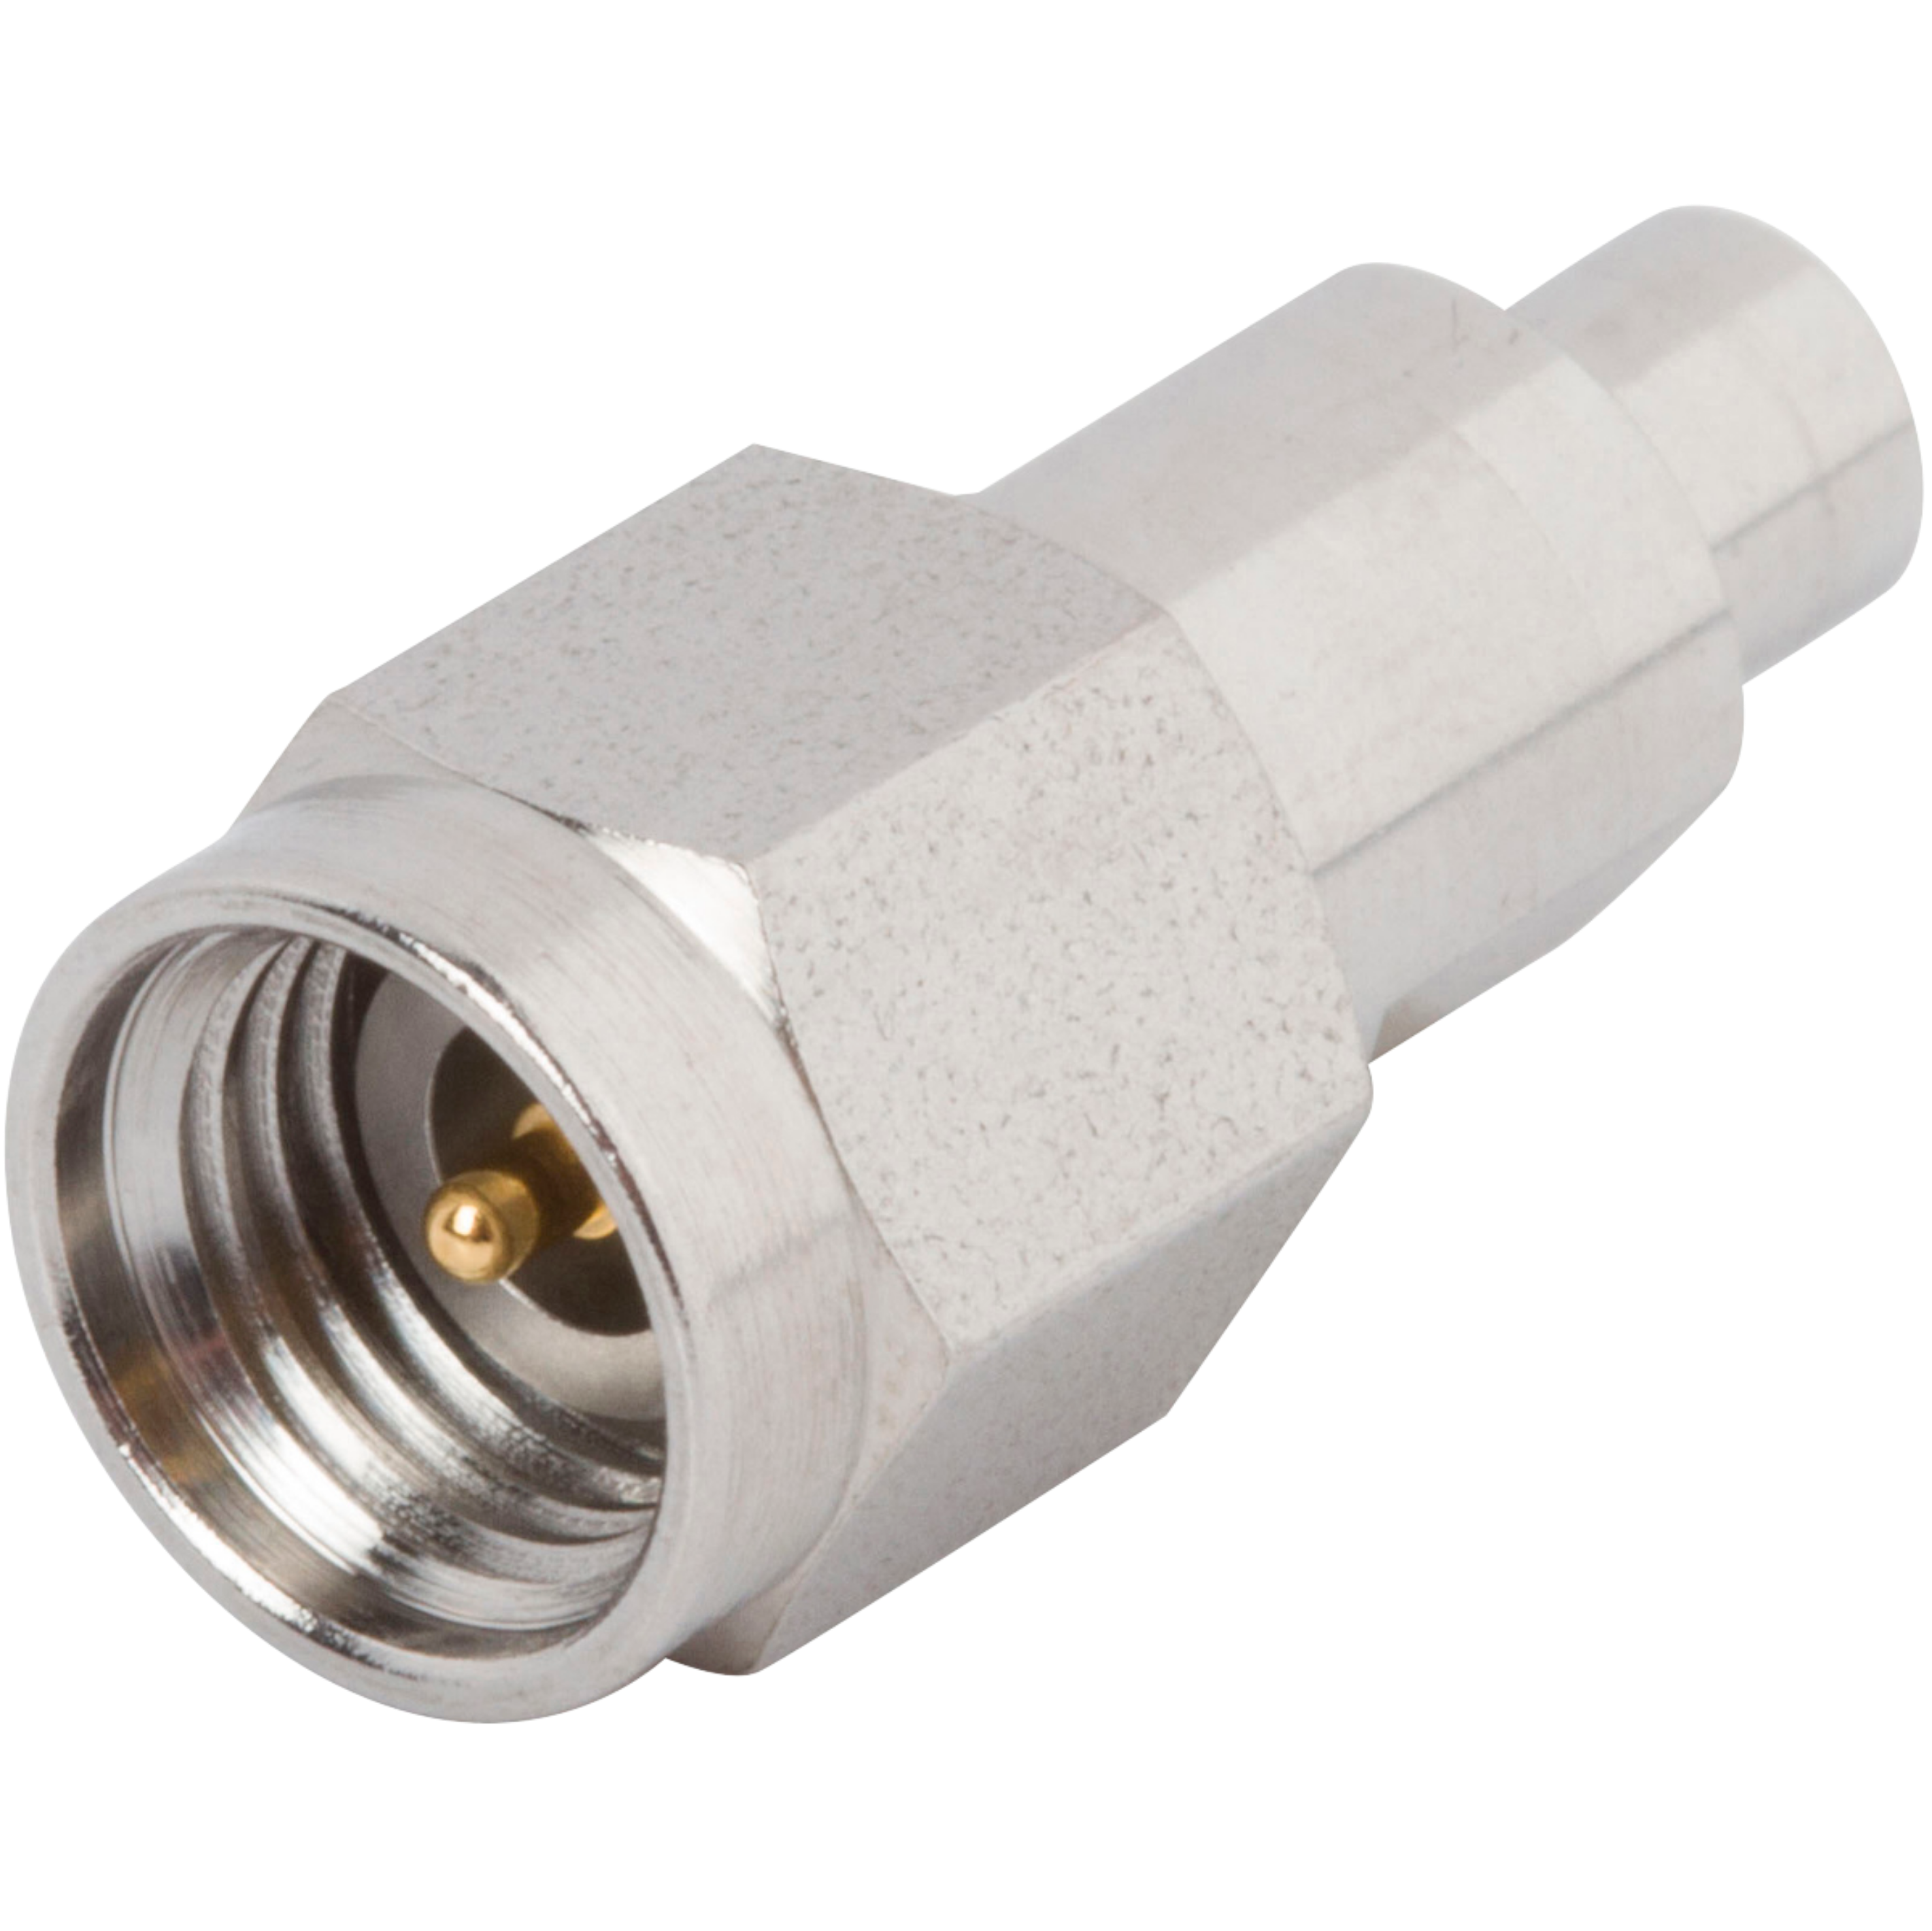 2.92mm Male to SMPM Male Adapter, SB, SF1115-6087